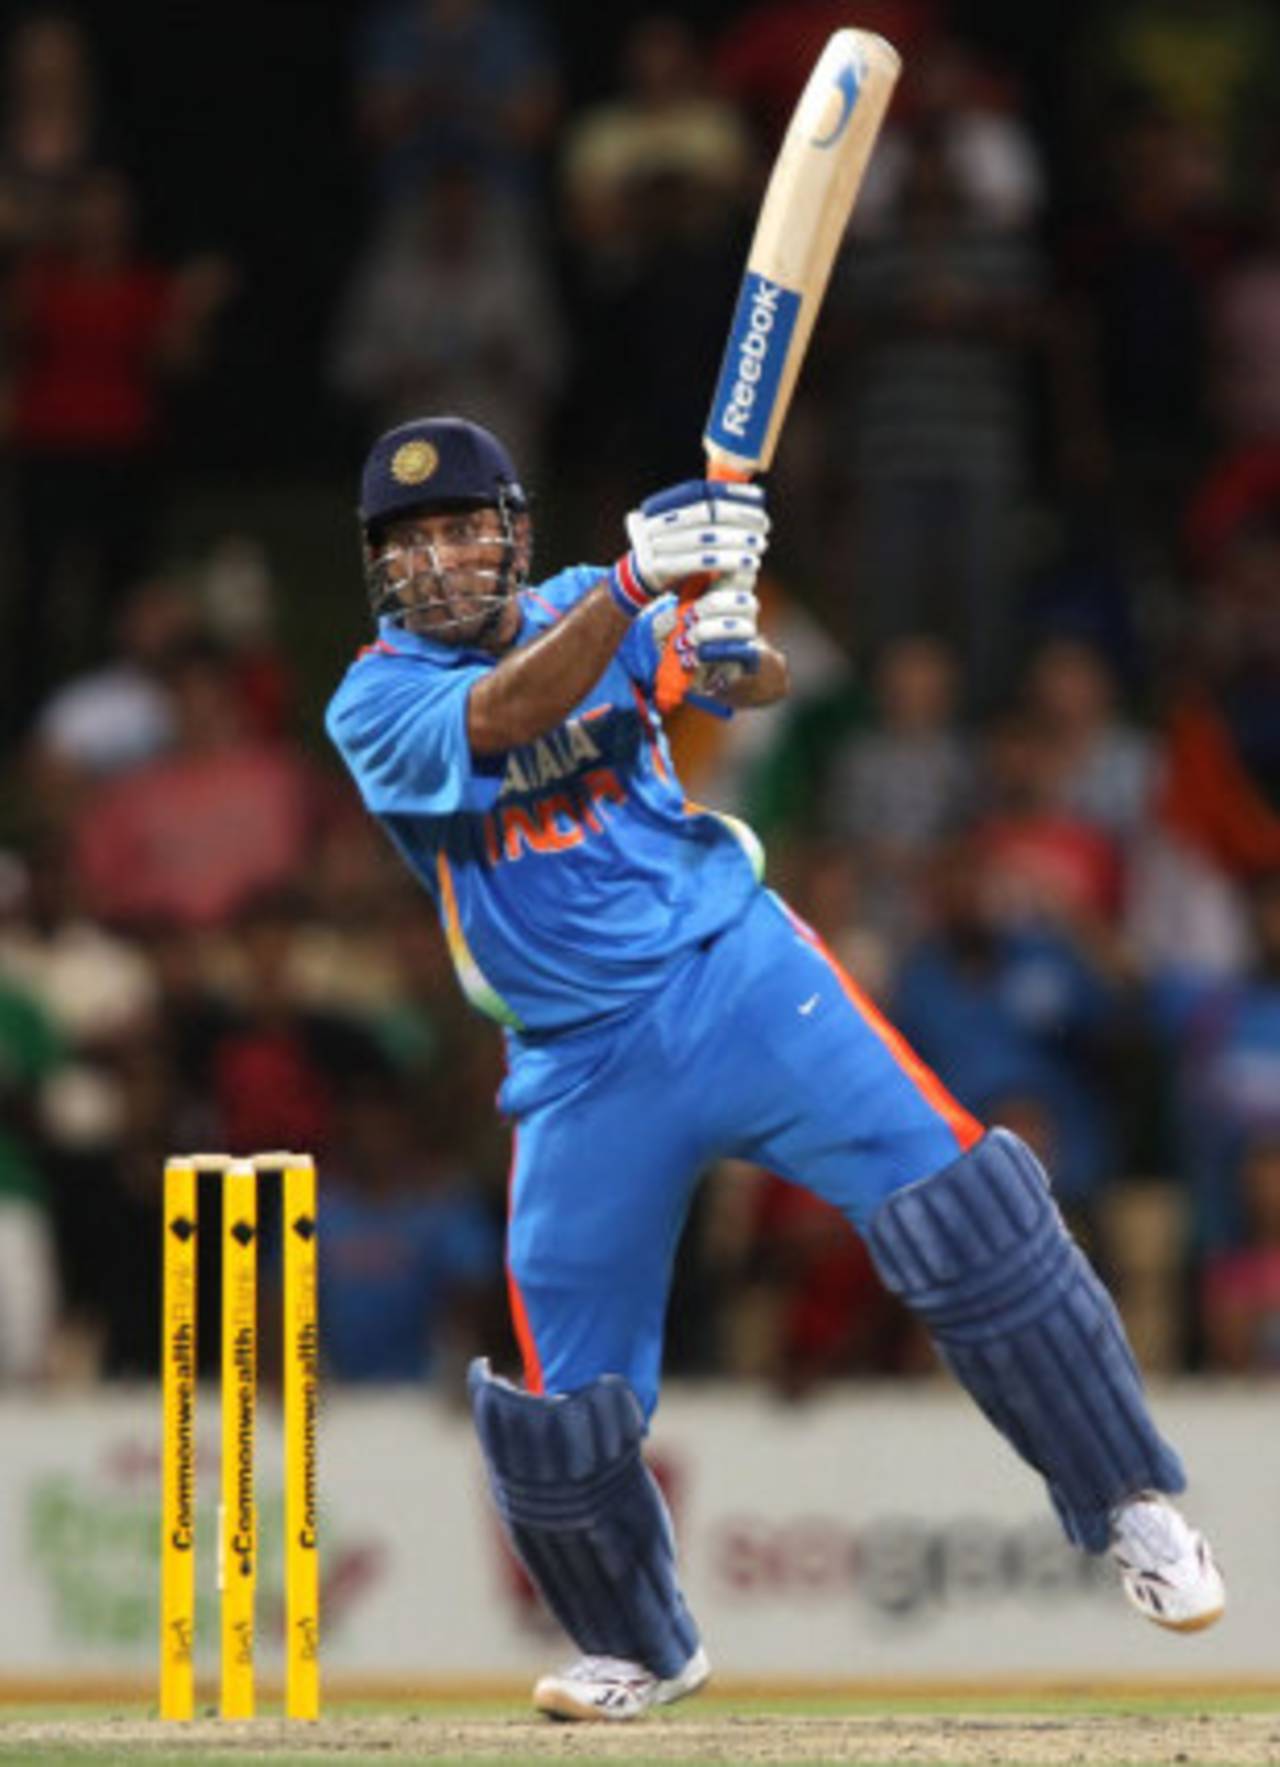 Forbes magazine pegs MS Dhoni's earnings for 2011-12 at $26.5 million&nbsp;&nbsp;&bull;&nbsp;&nbsp;Getty Images